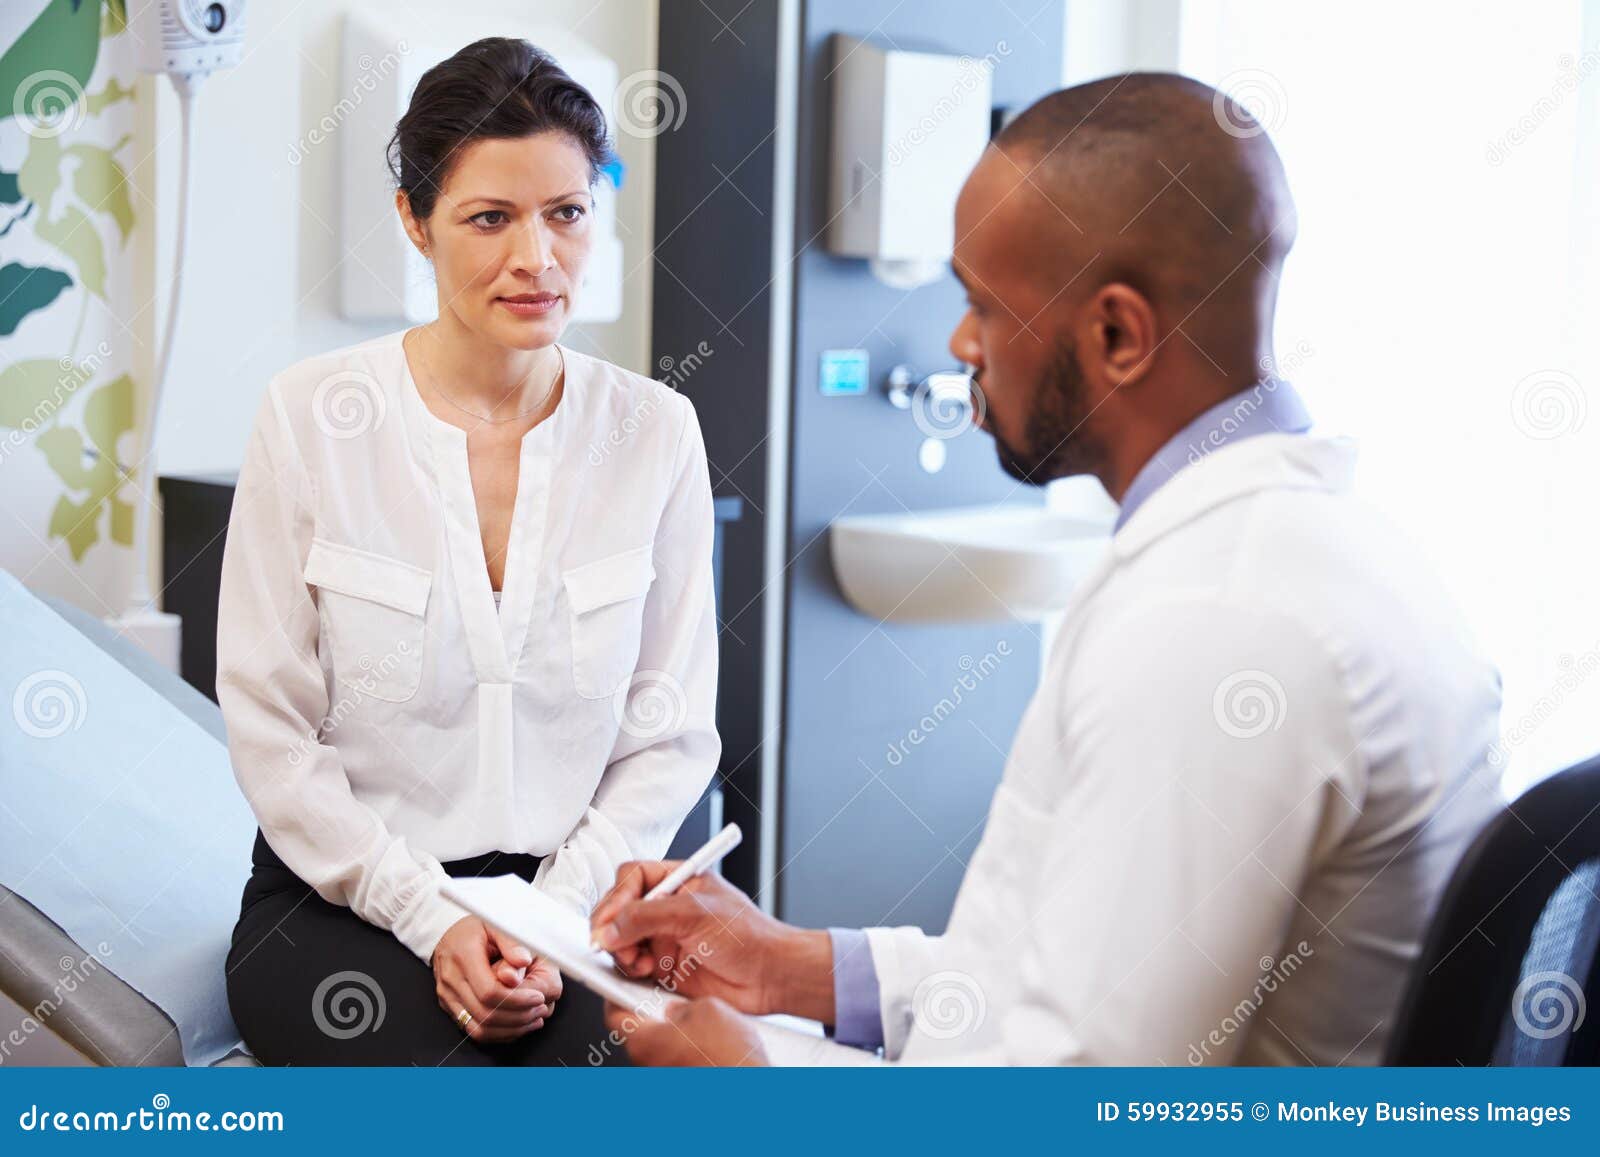 female patient and doctor have consultation in hospital room